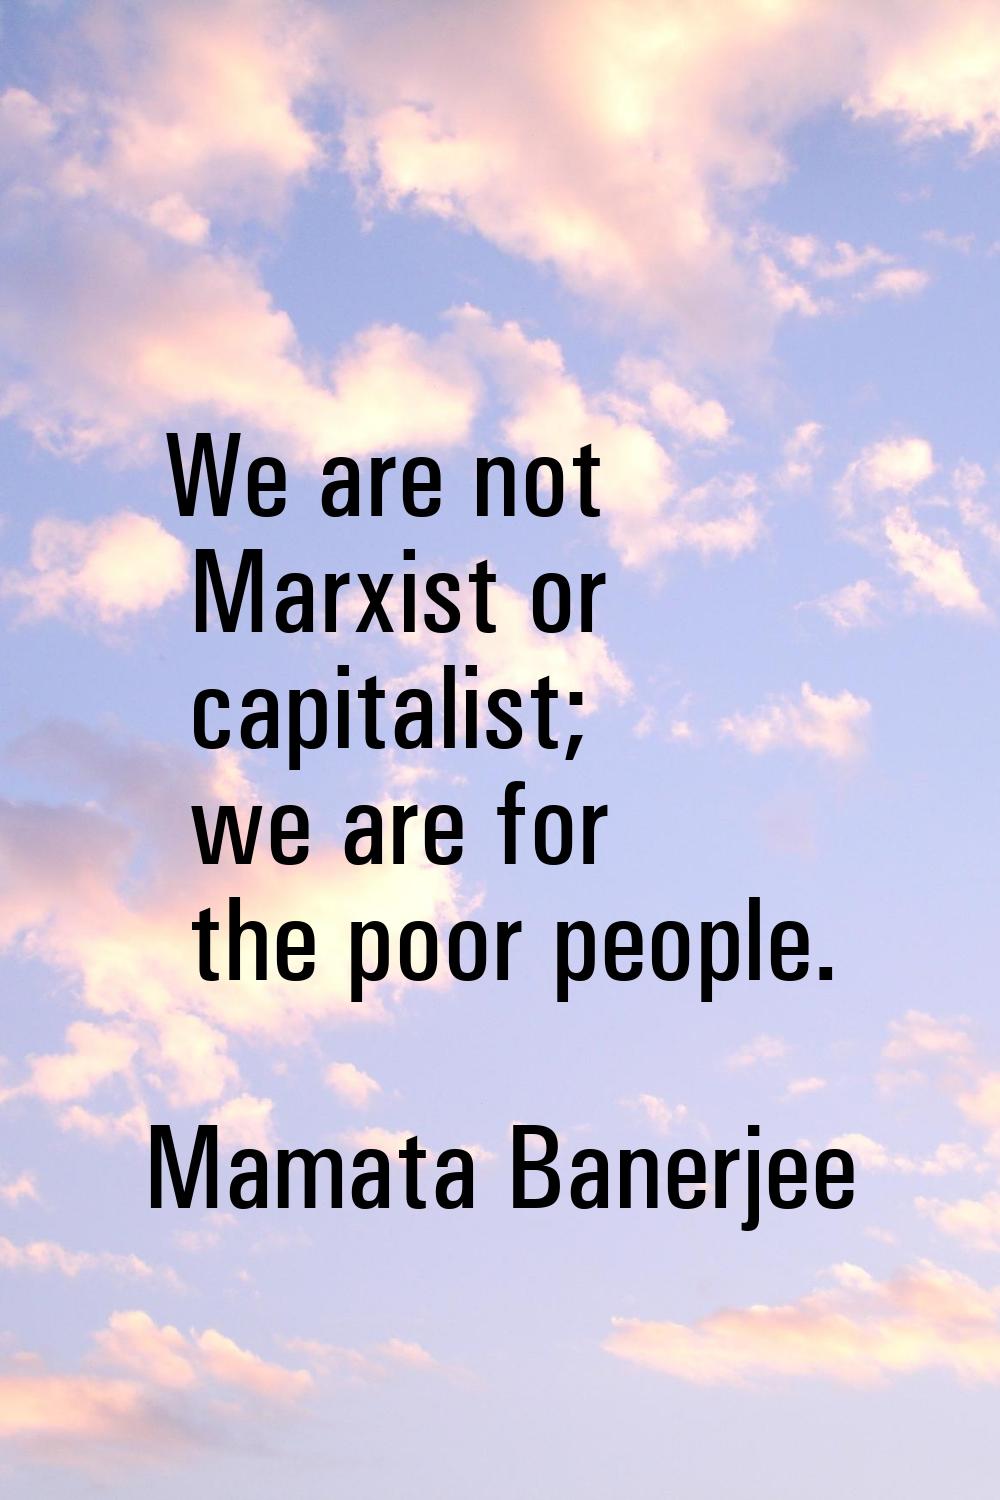 We are not Marxist or capitalist; we are for the poor people.